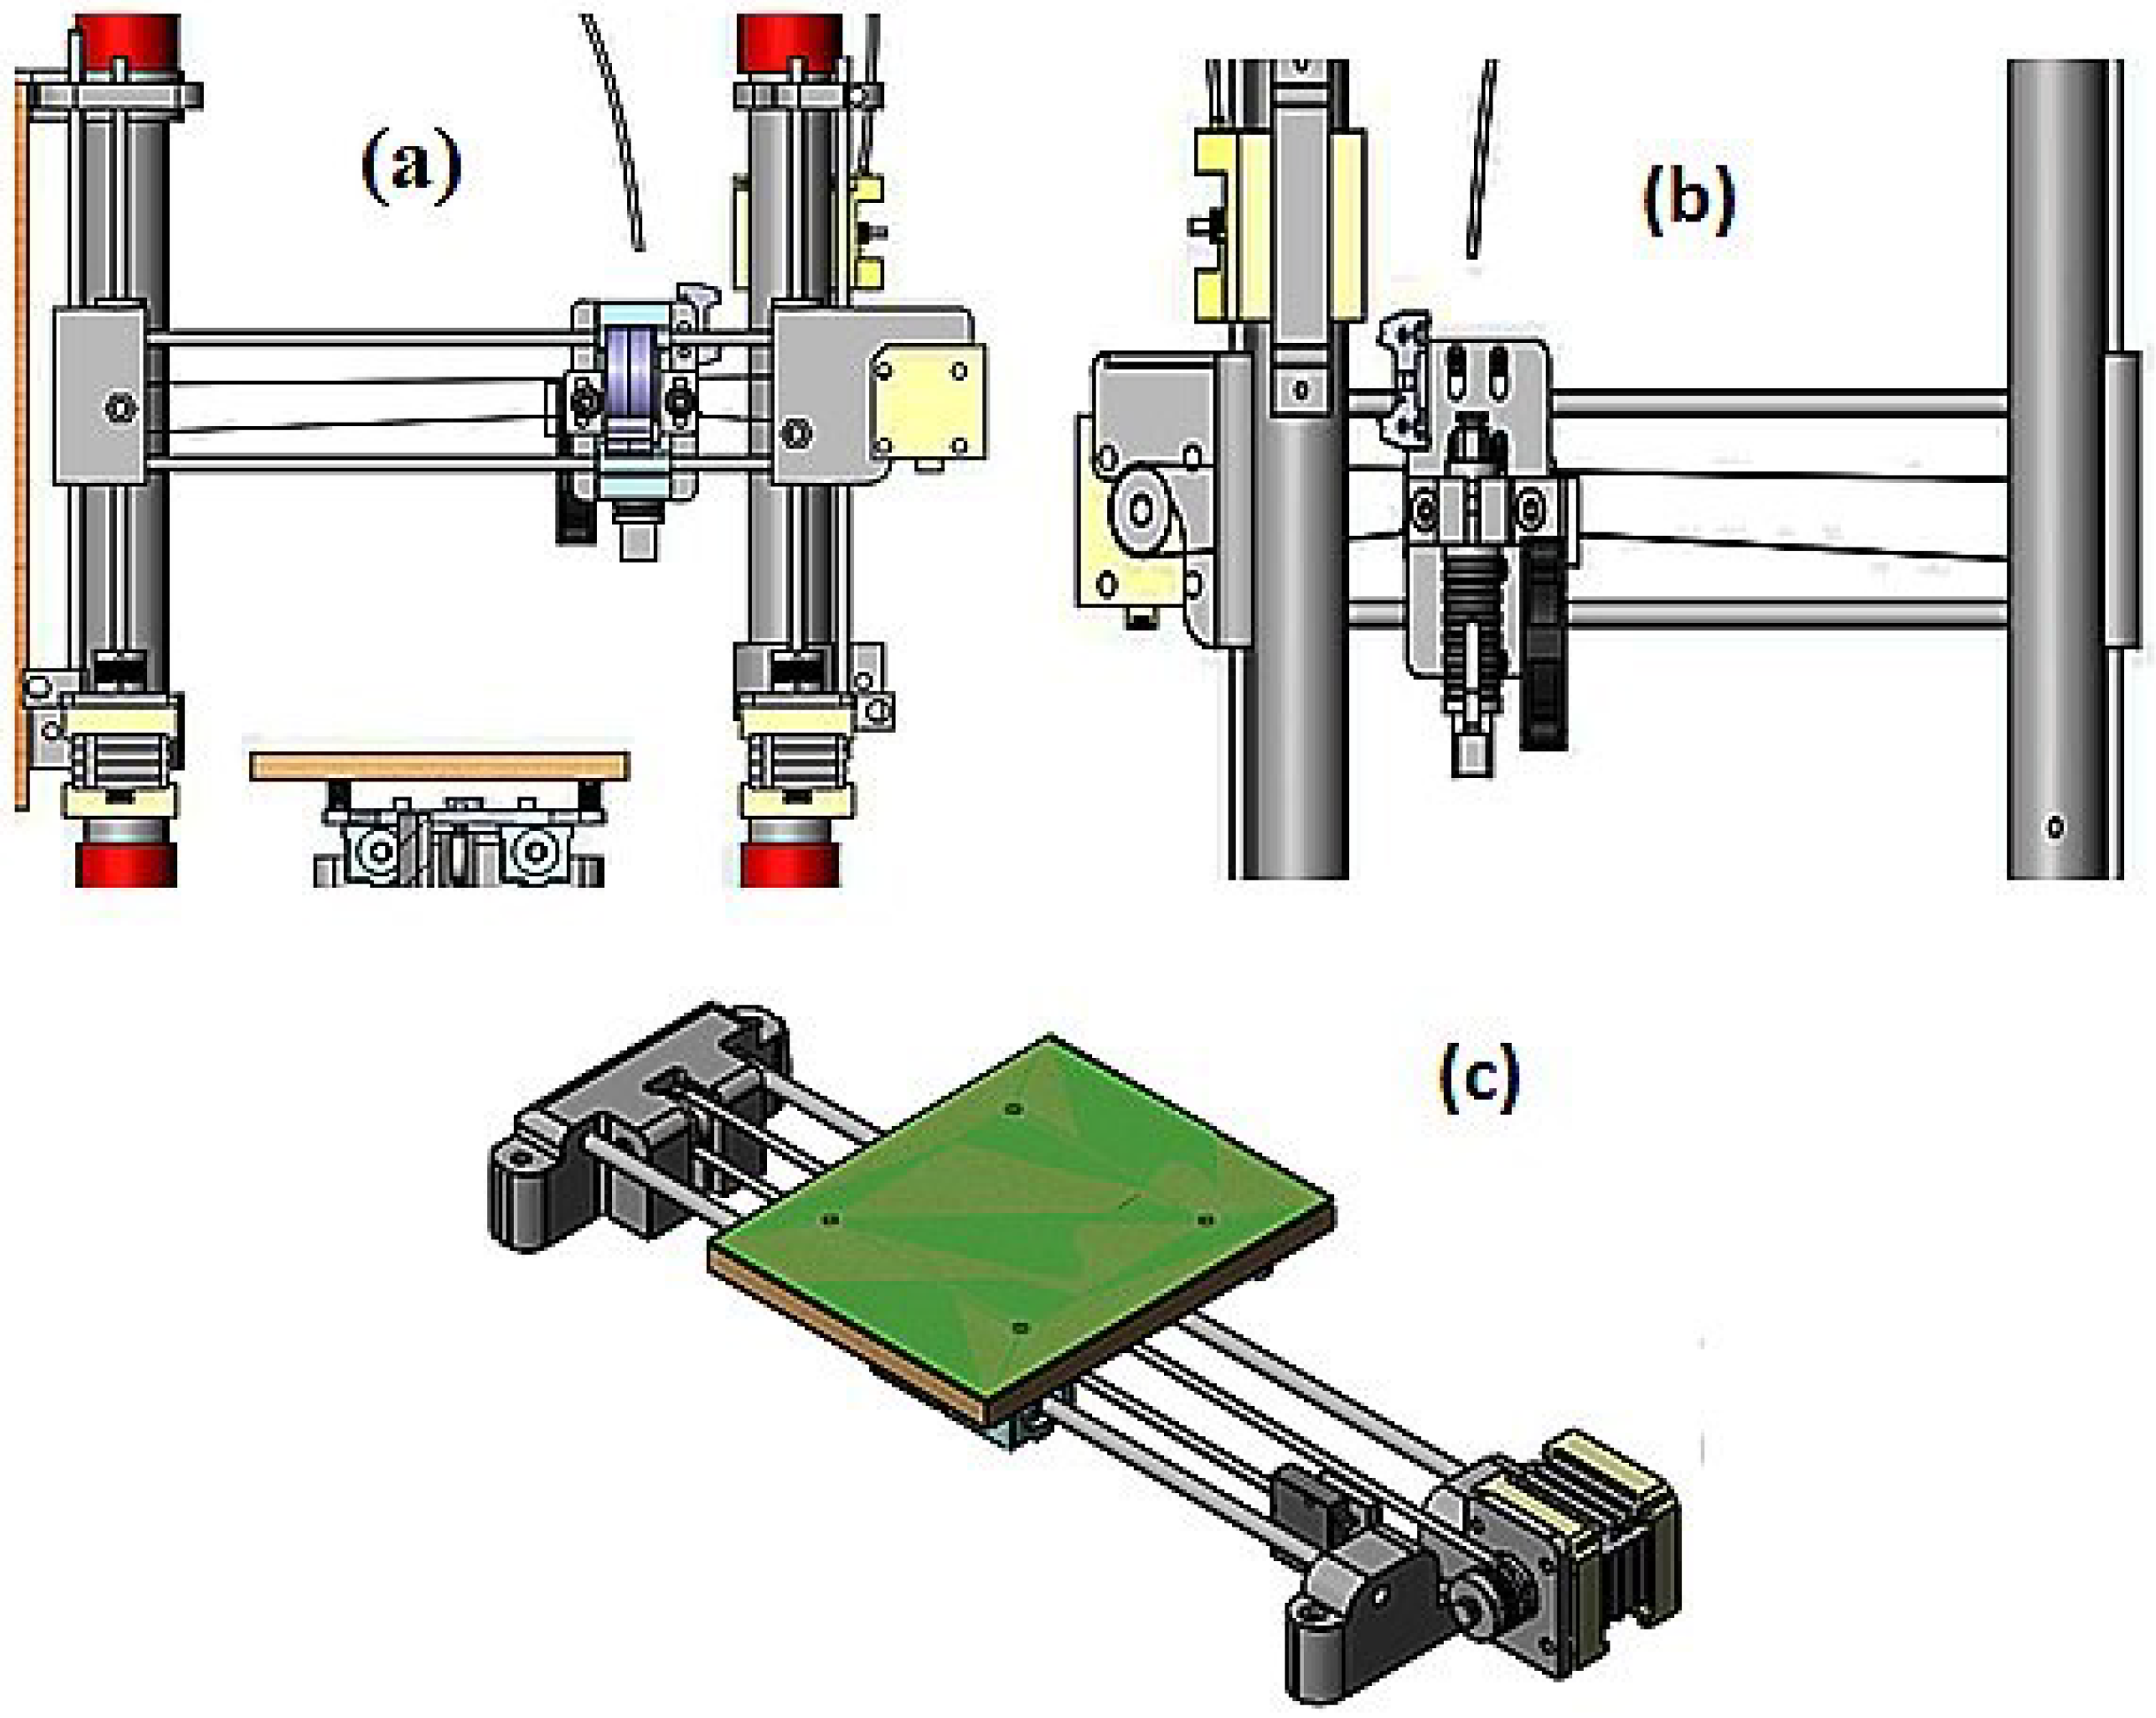 J. Compos. Sci. | Free Full-Text | Design and Construction of a  Low-Cost-High-Accessibility 3D Printing Machine for Producing Plastic  Components